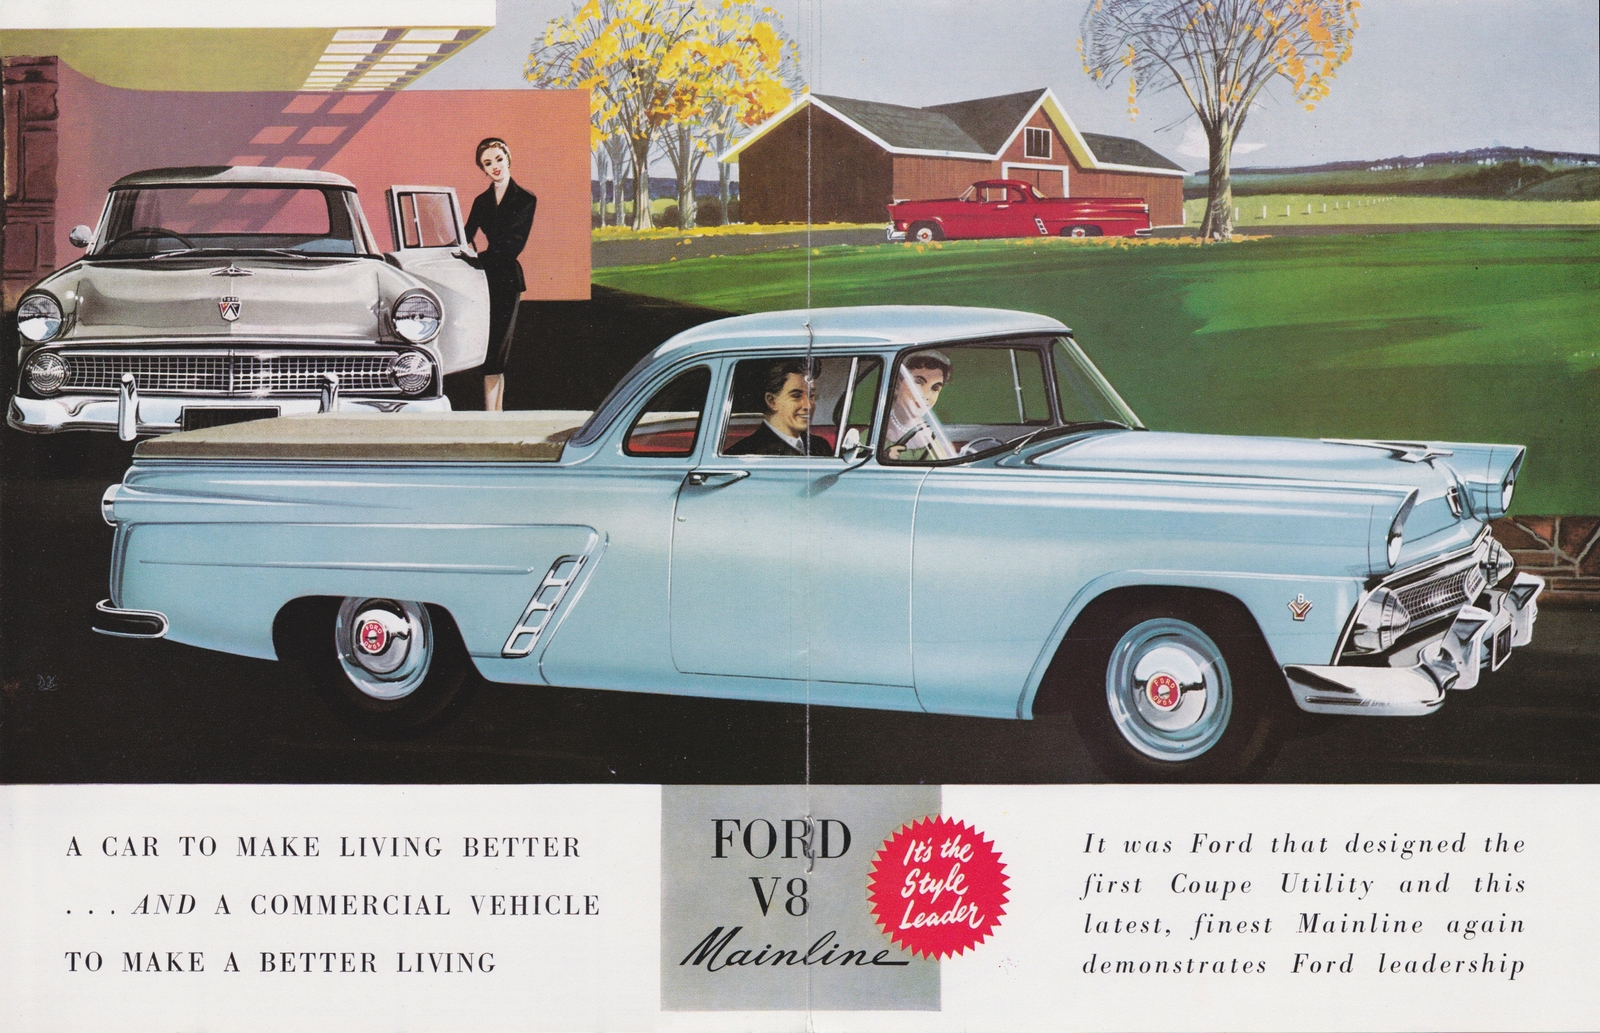 n_1955 Ford Mainline Coupe Utility-08-09.jpg